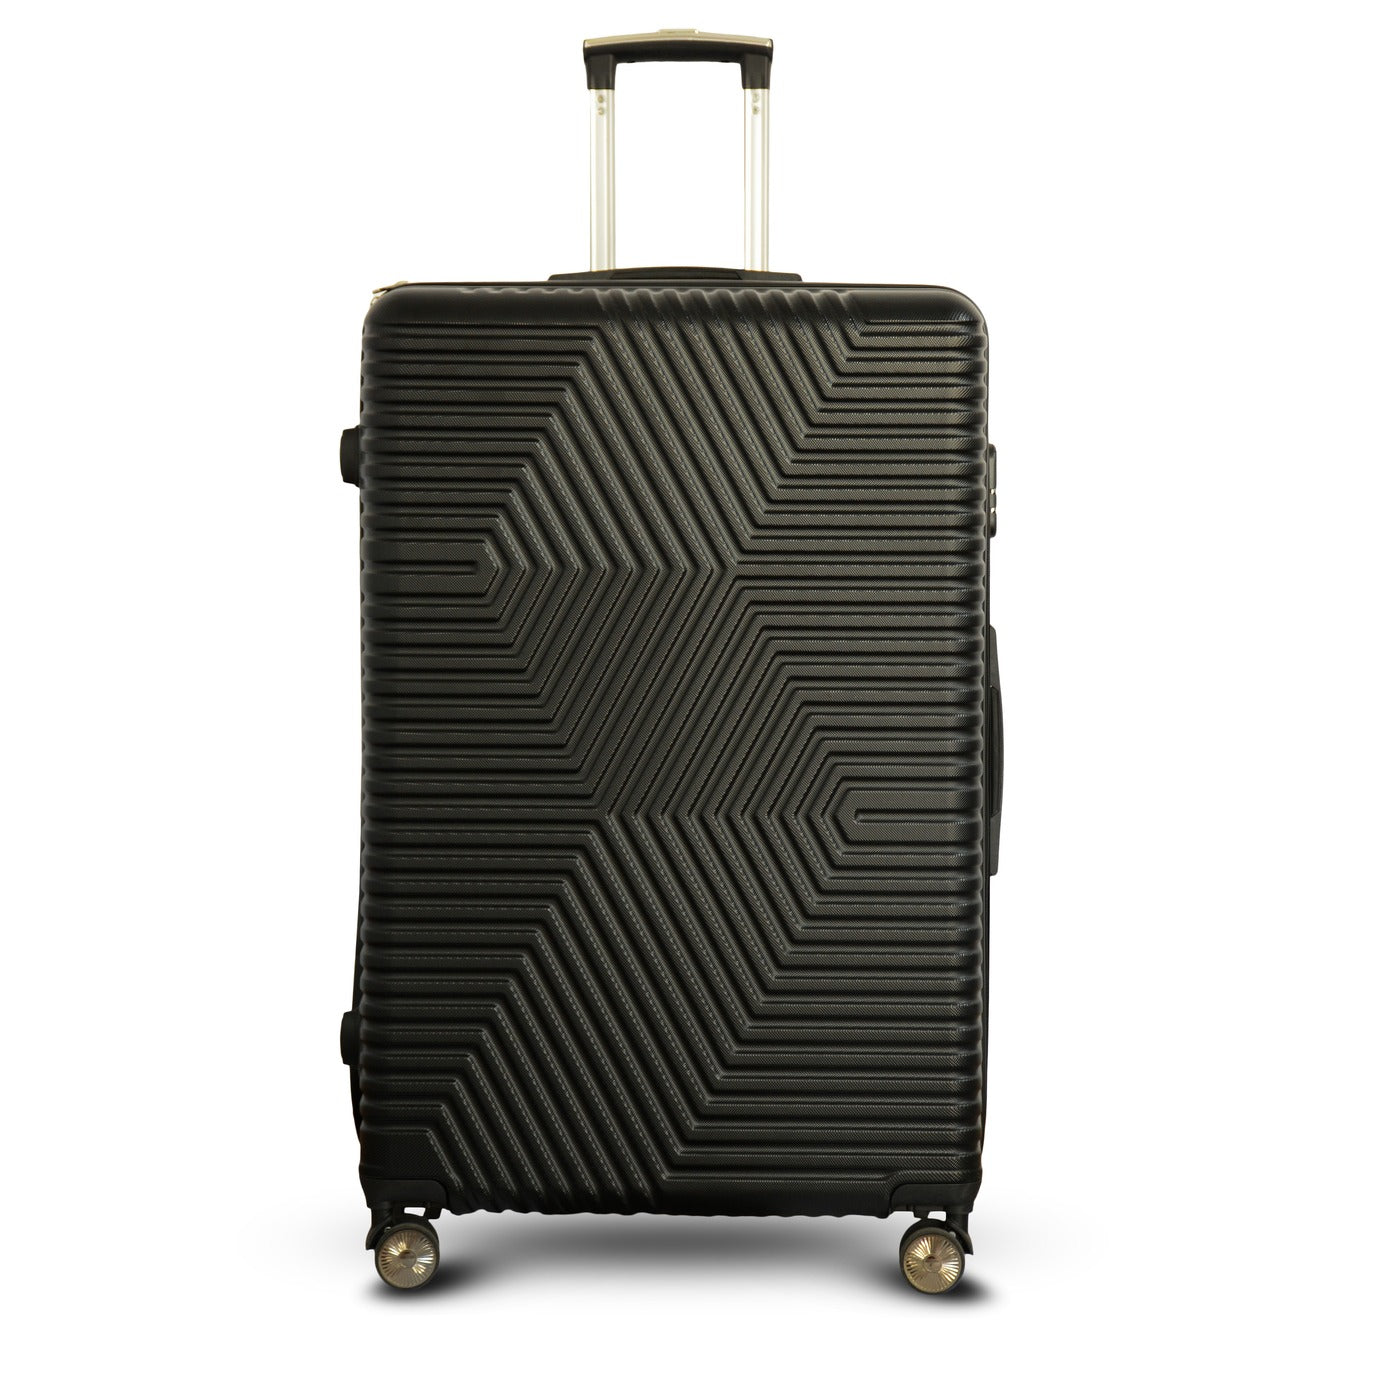  Zig Zag ABS Lightweight Luggage Bag With Double Spinner Wheel Zaappy